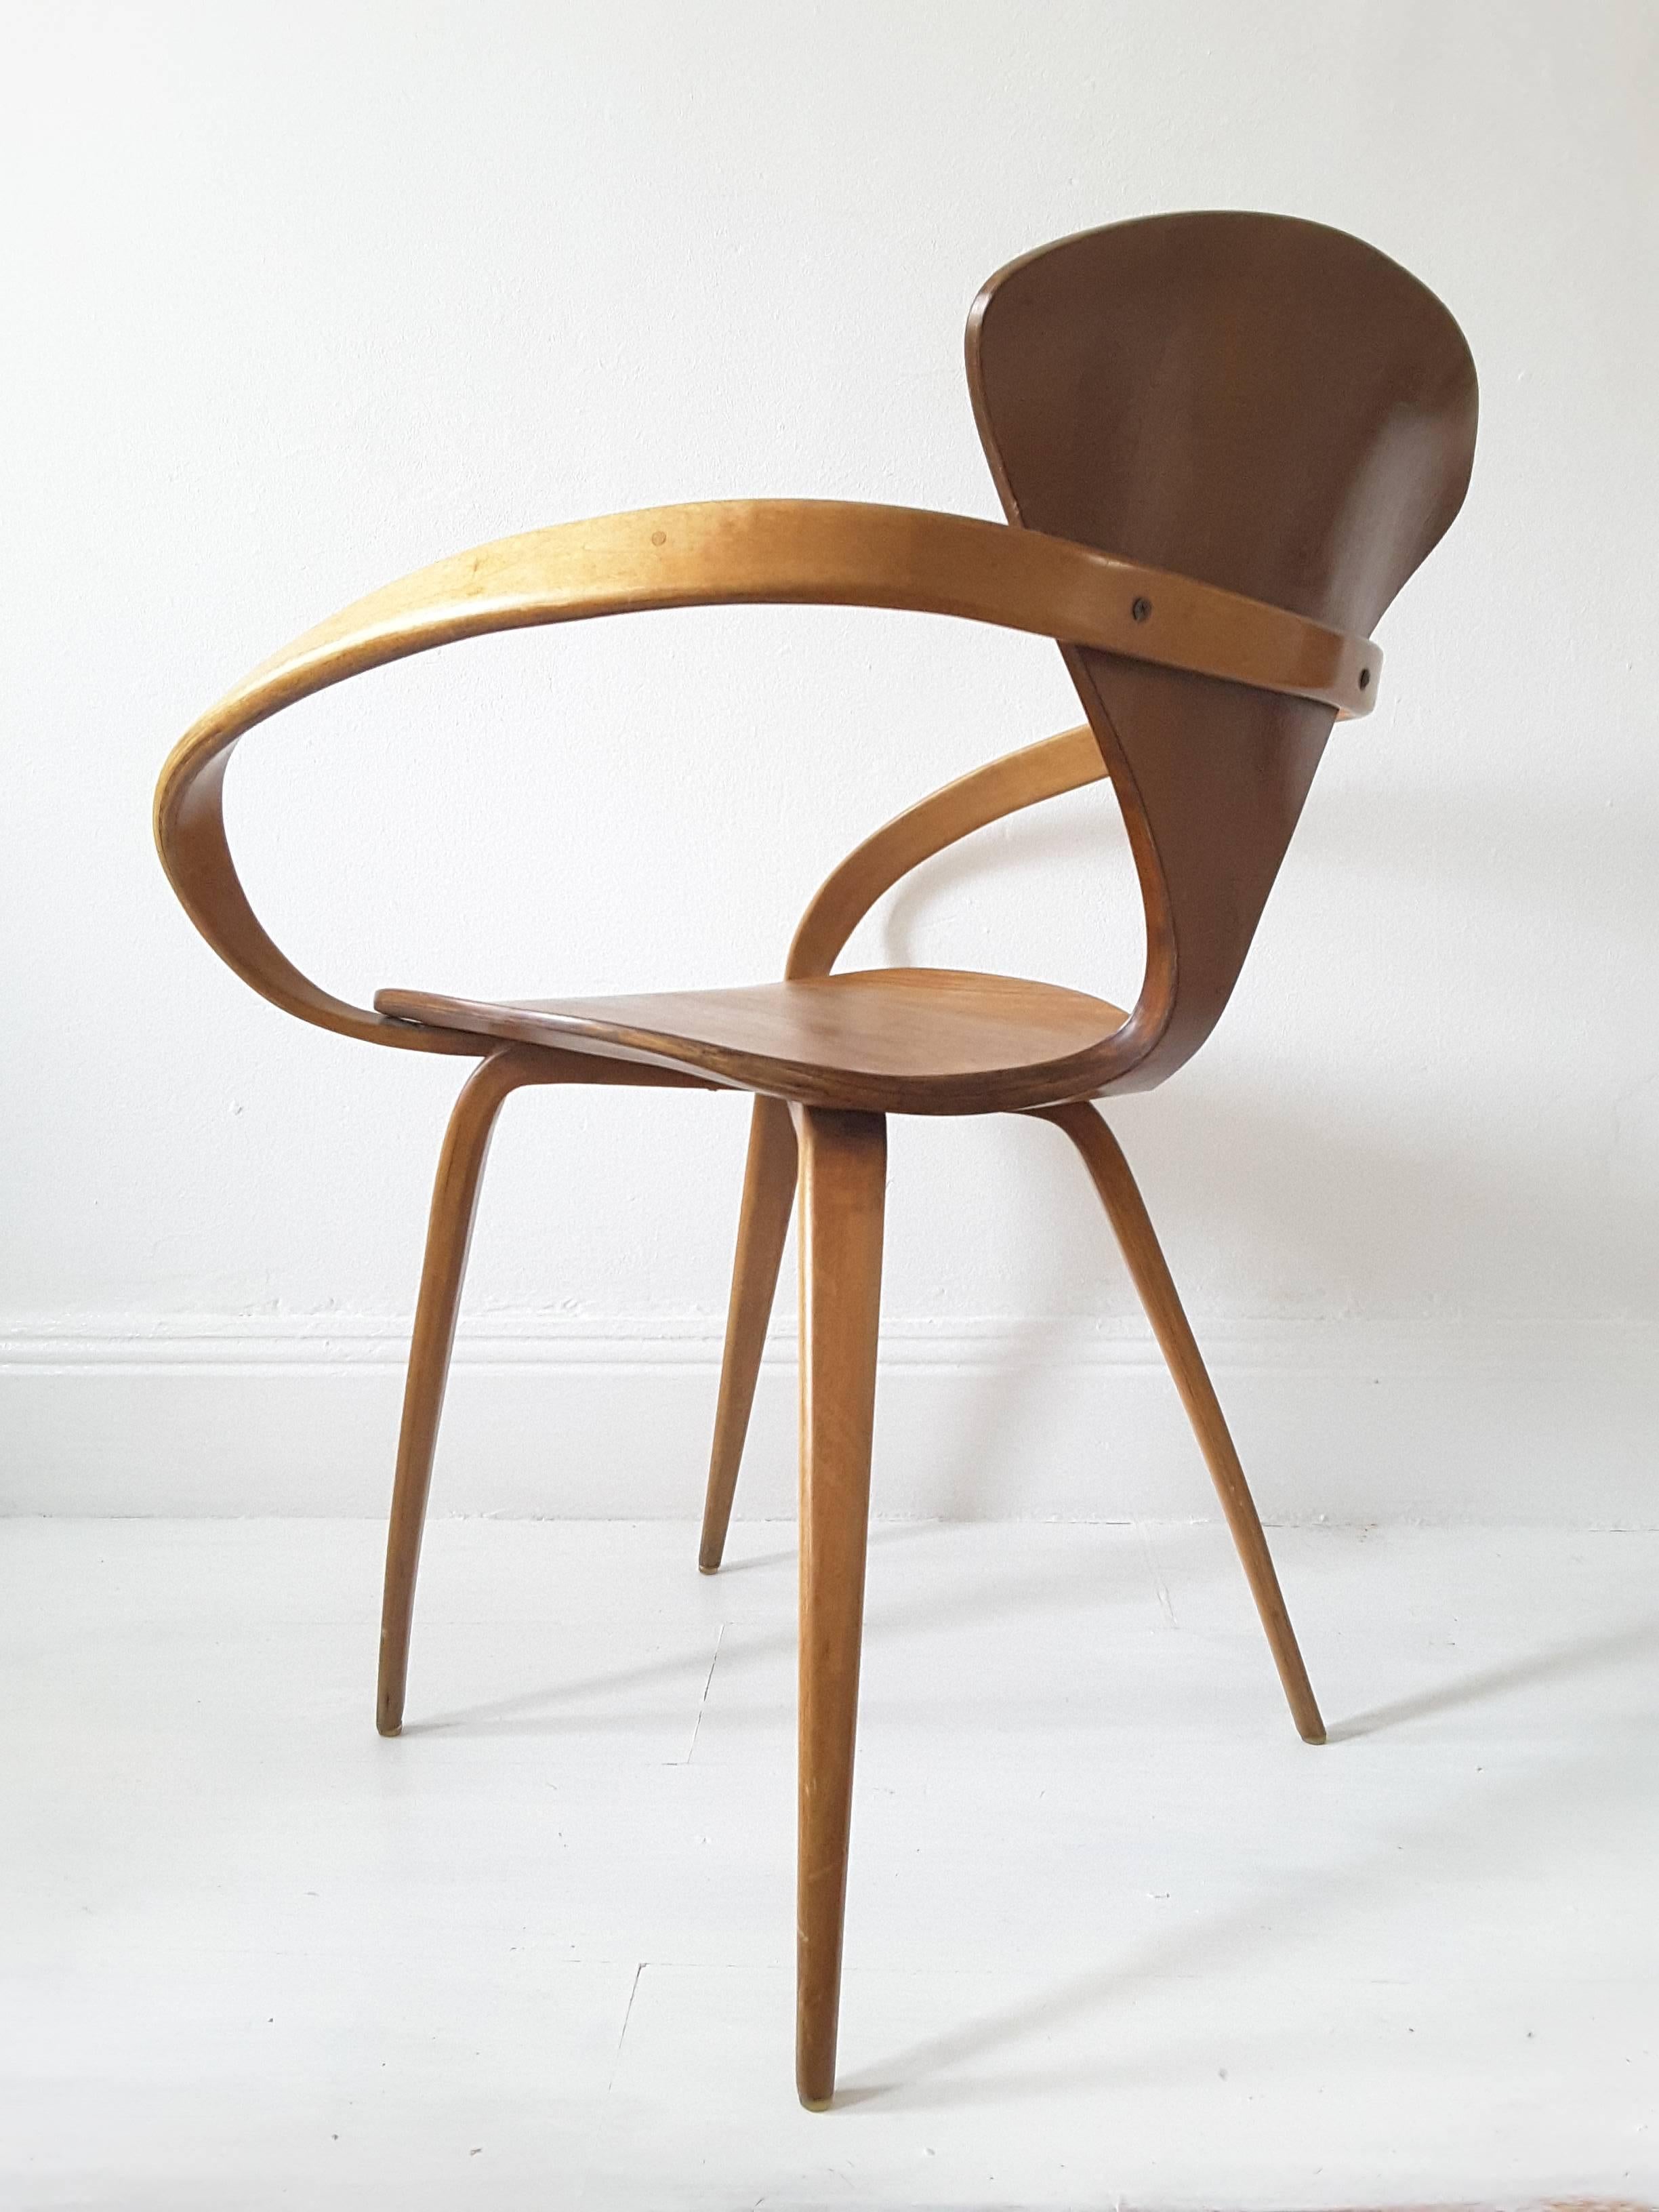 20th Century Mid-Century Bent Plywood Cherner Chair Designed by Norman Cherner for Plycraft